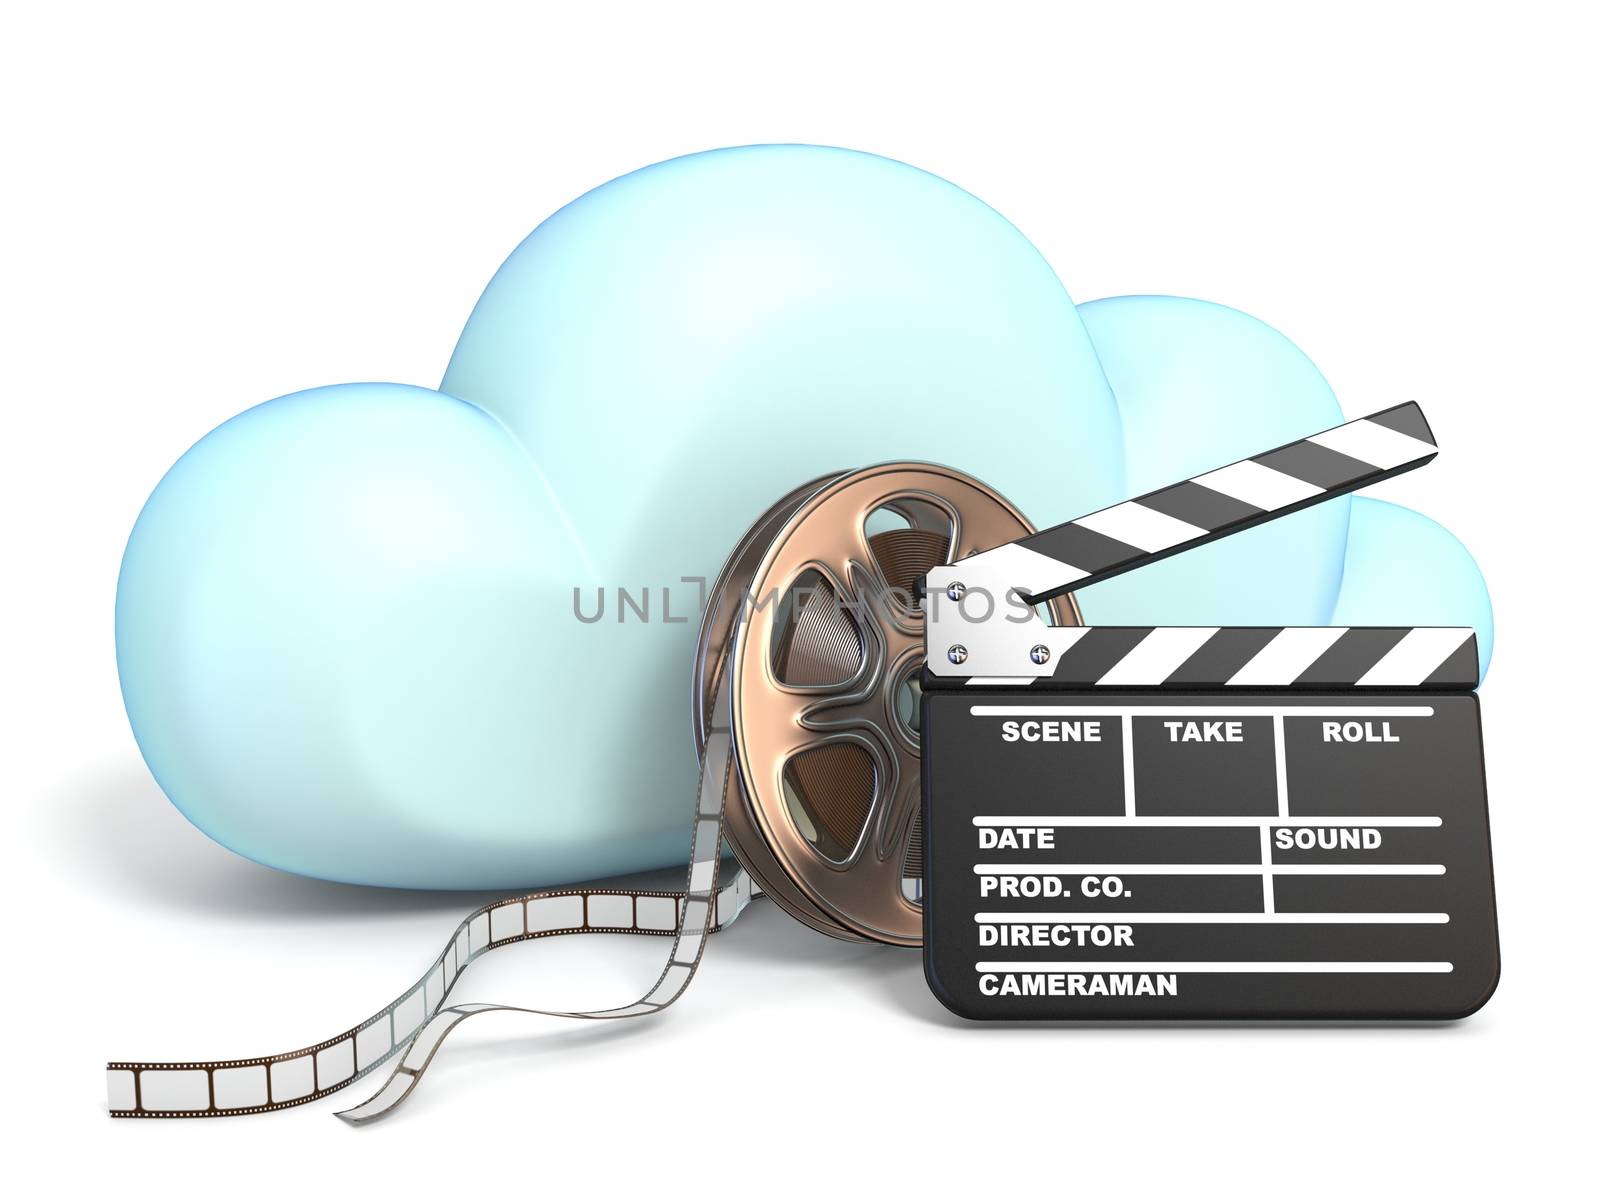 Cloud icon vith movie tape and clapper 3D rendering isolated on white background